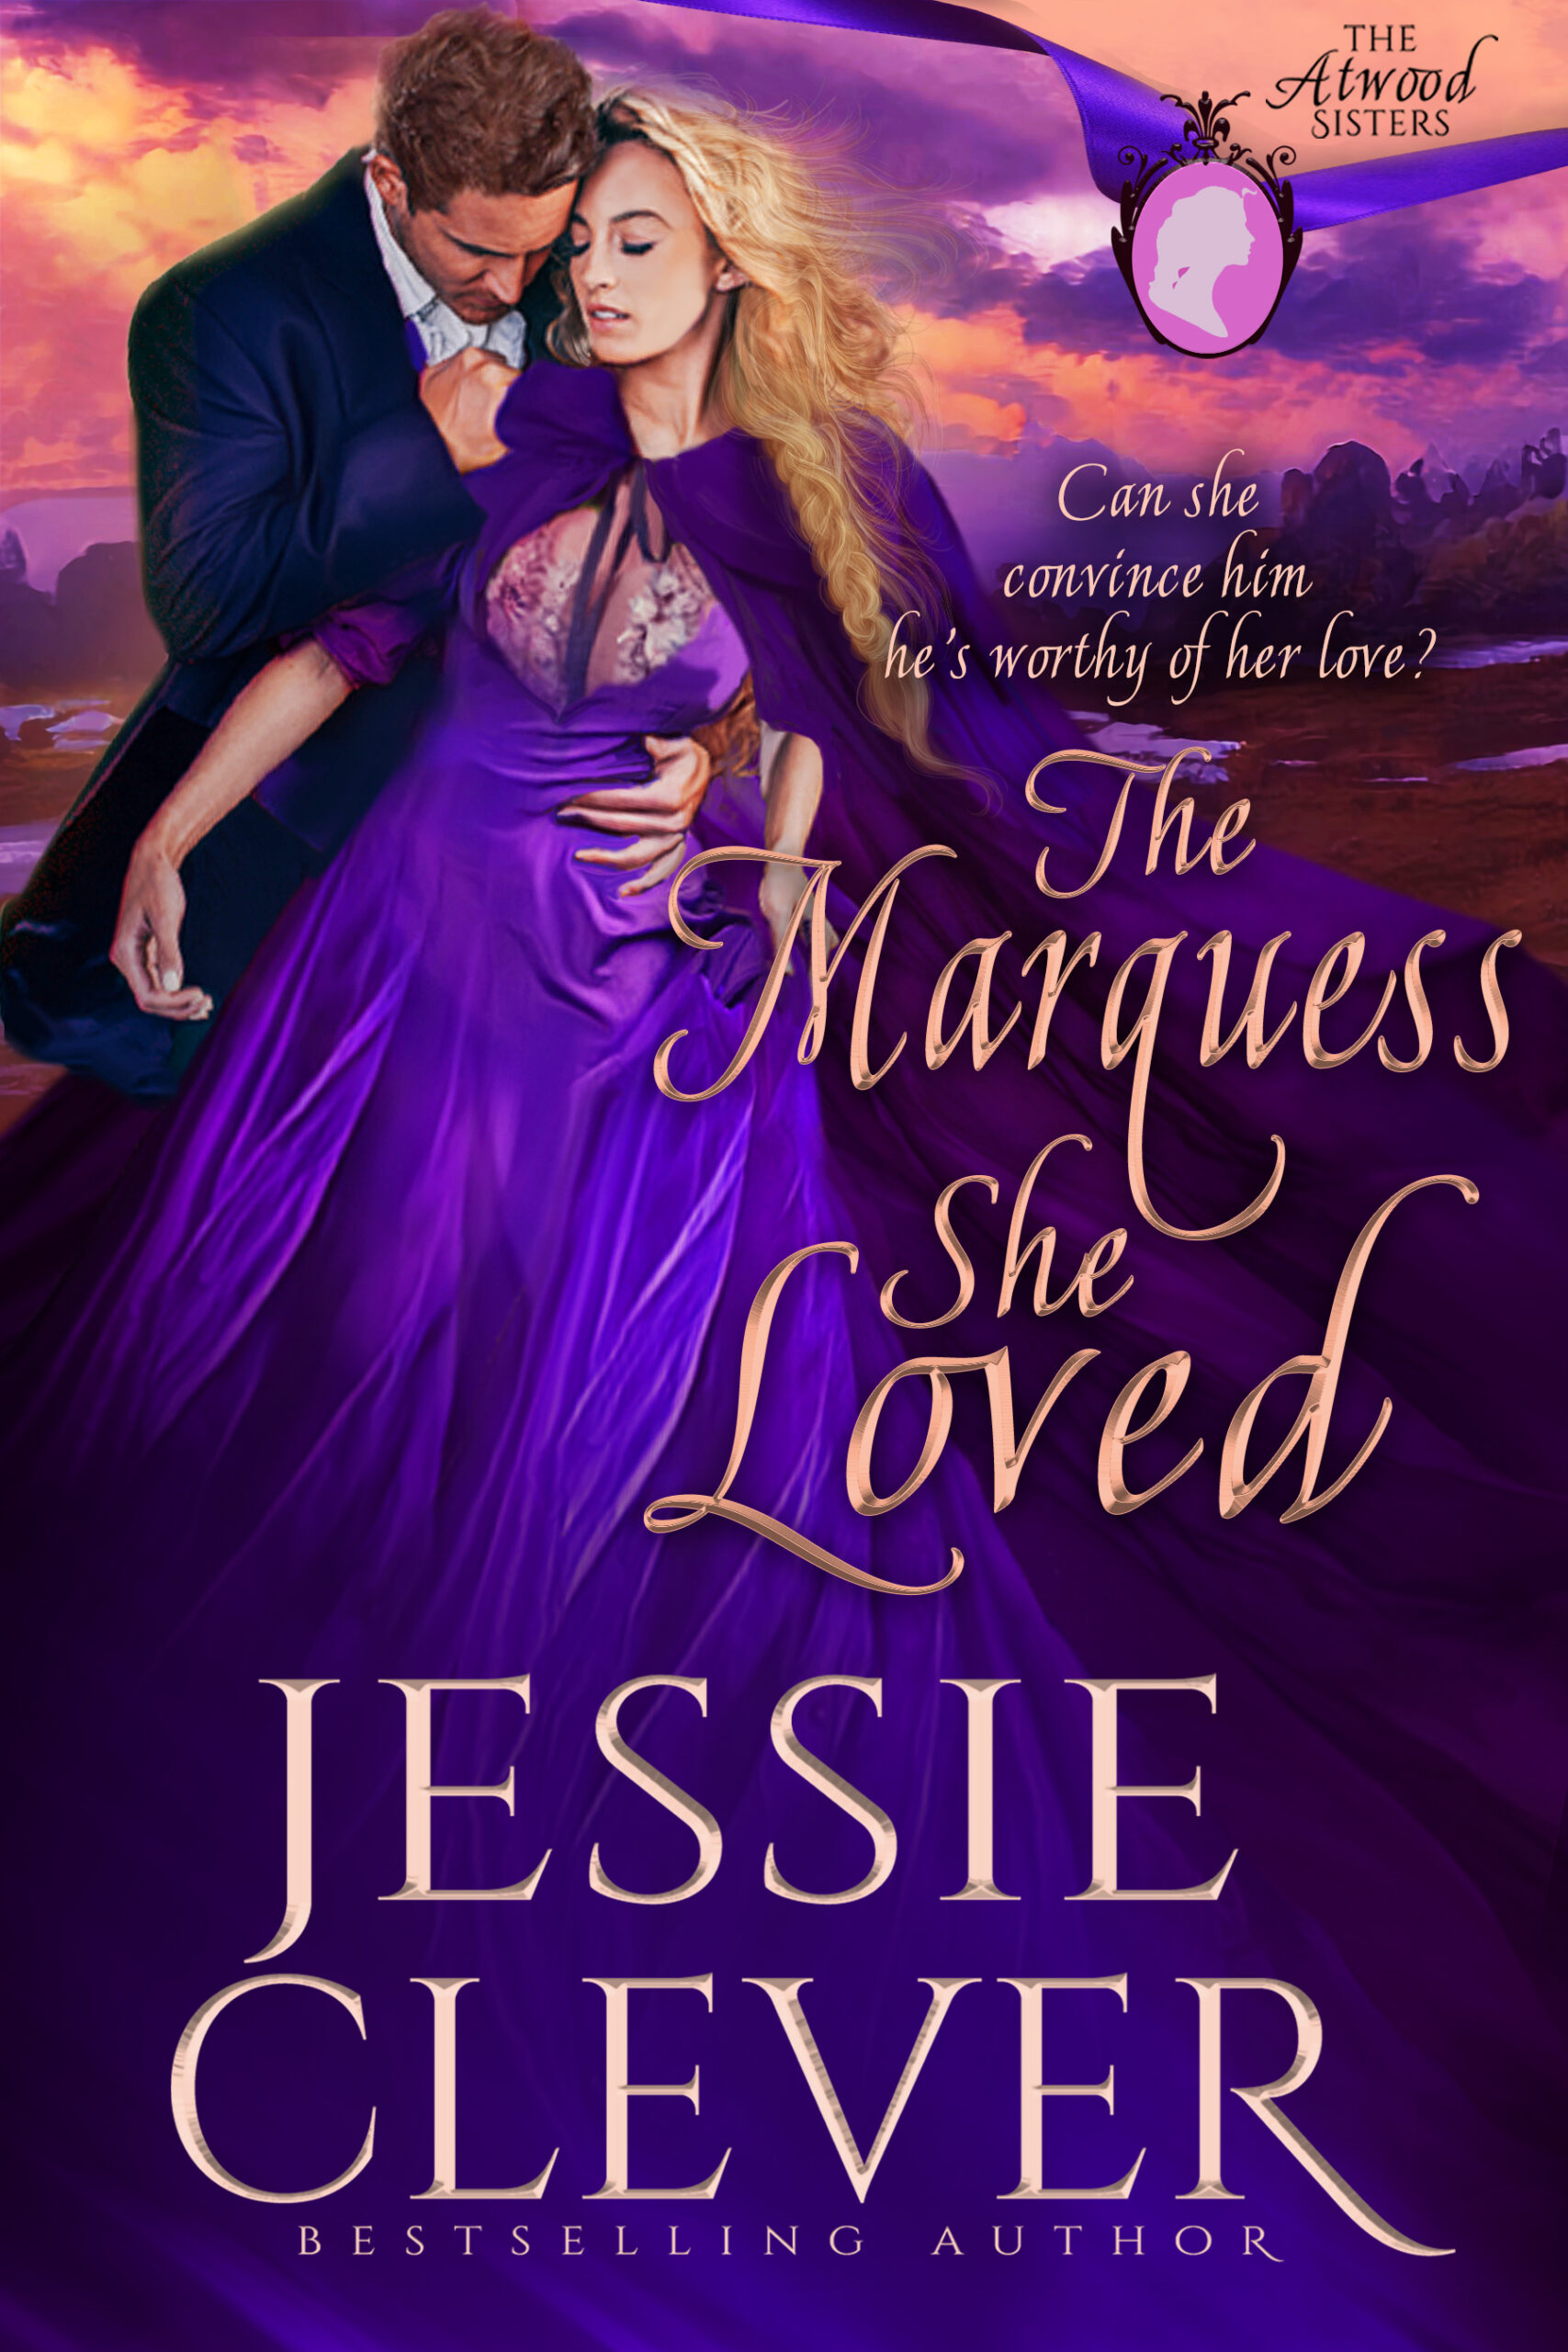 The cover of The Marquess She Loved, book 2 of the Atwood Sisters, featuring the heroine in a purple dress being held by a man in a suit